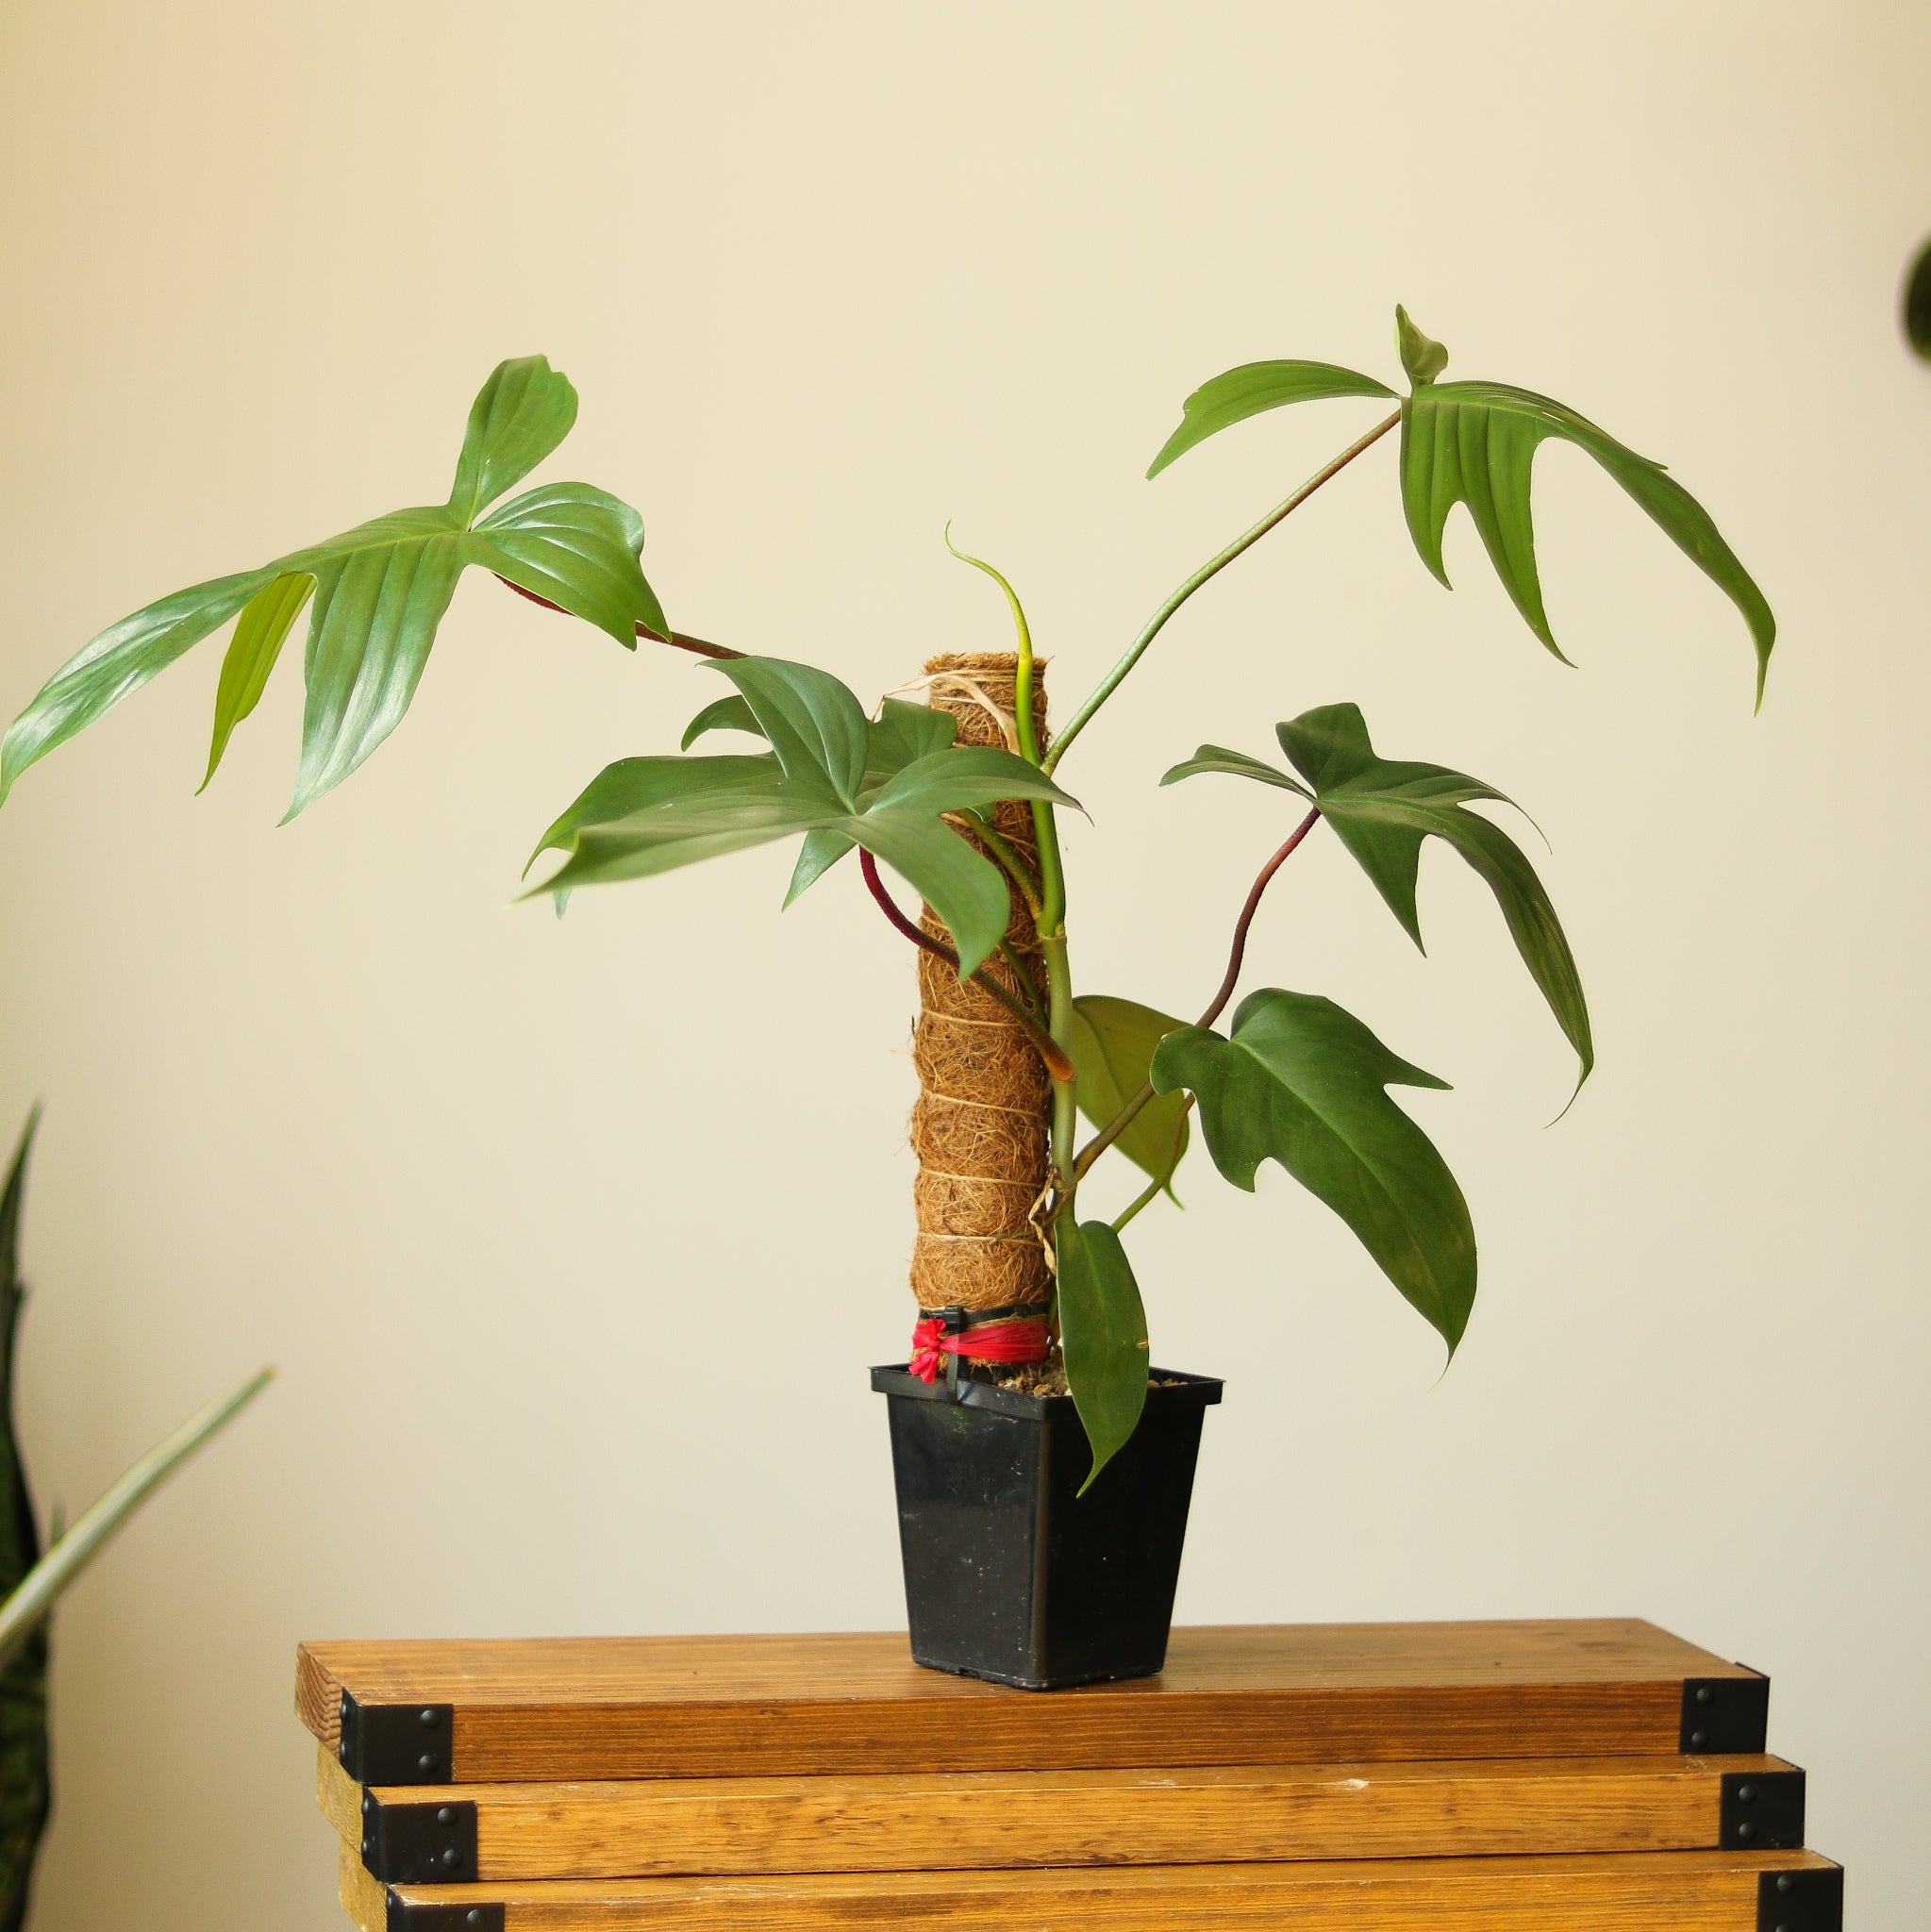 Sturdy Plant Totem Poles for Indoor Growth and Support – Ed's Plant Shop